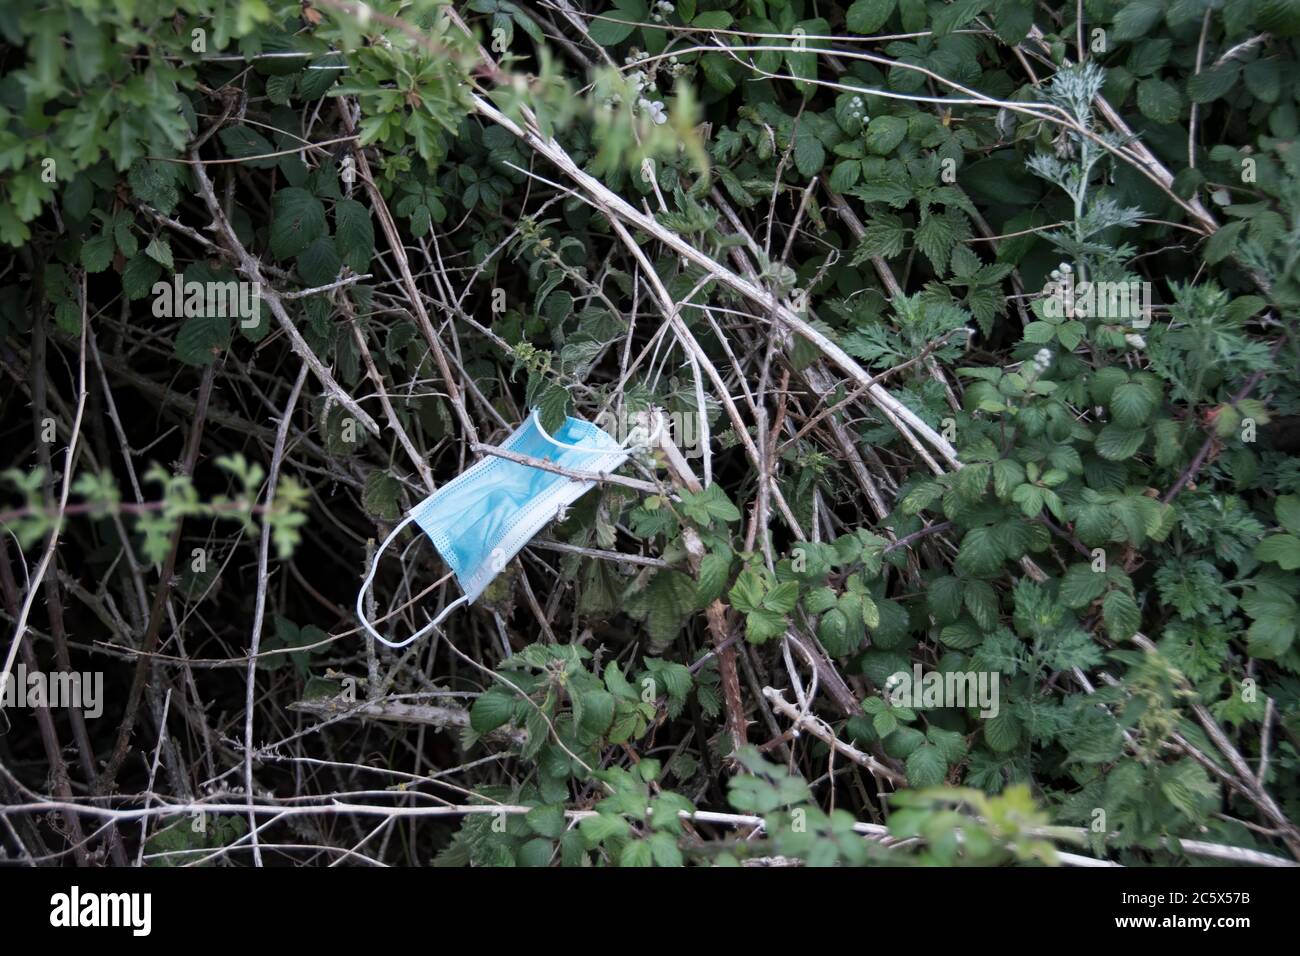 The new litter - a discarded face mask thrown out on a roadside verge. Stock Photo